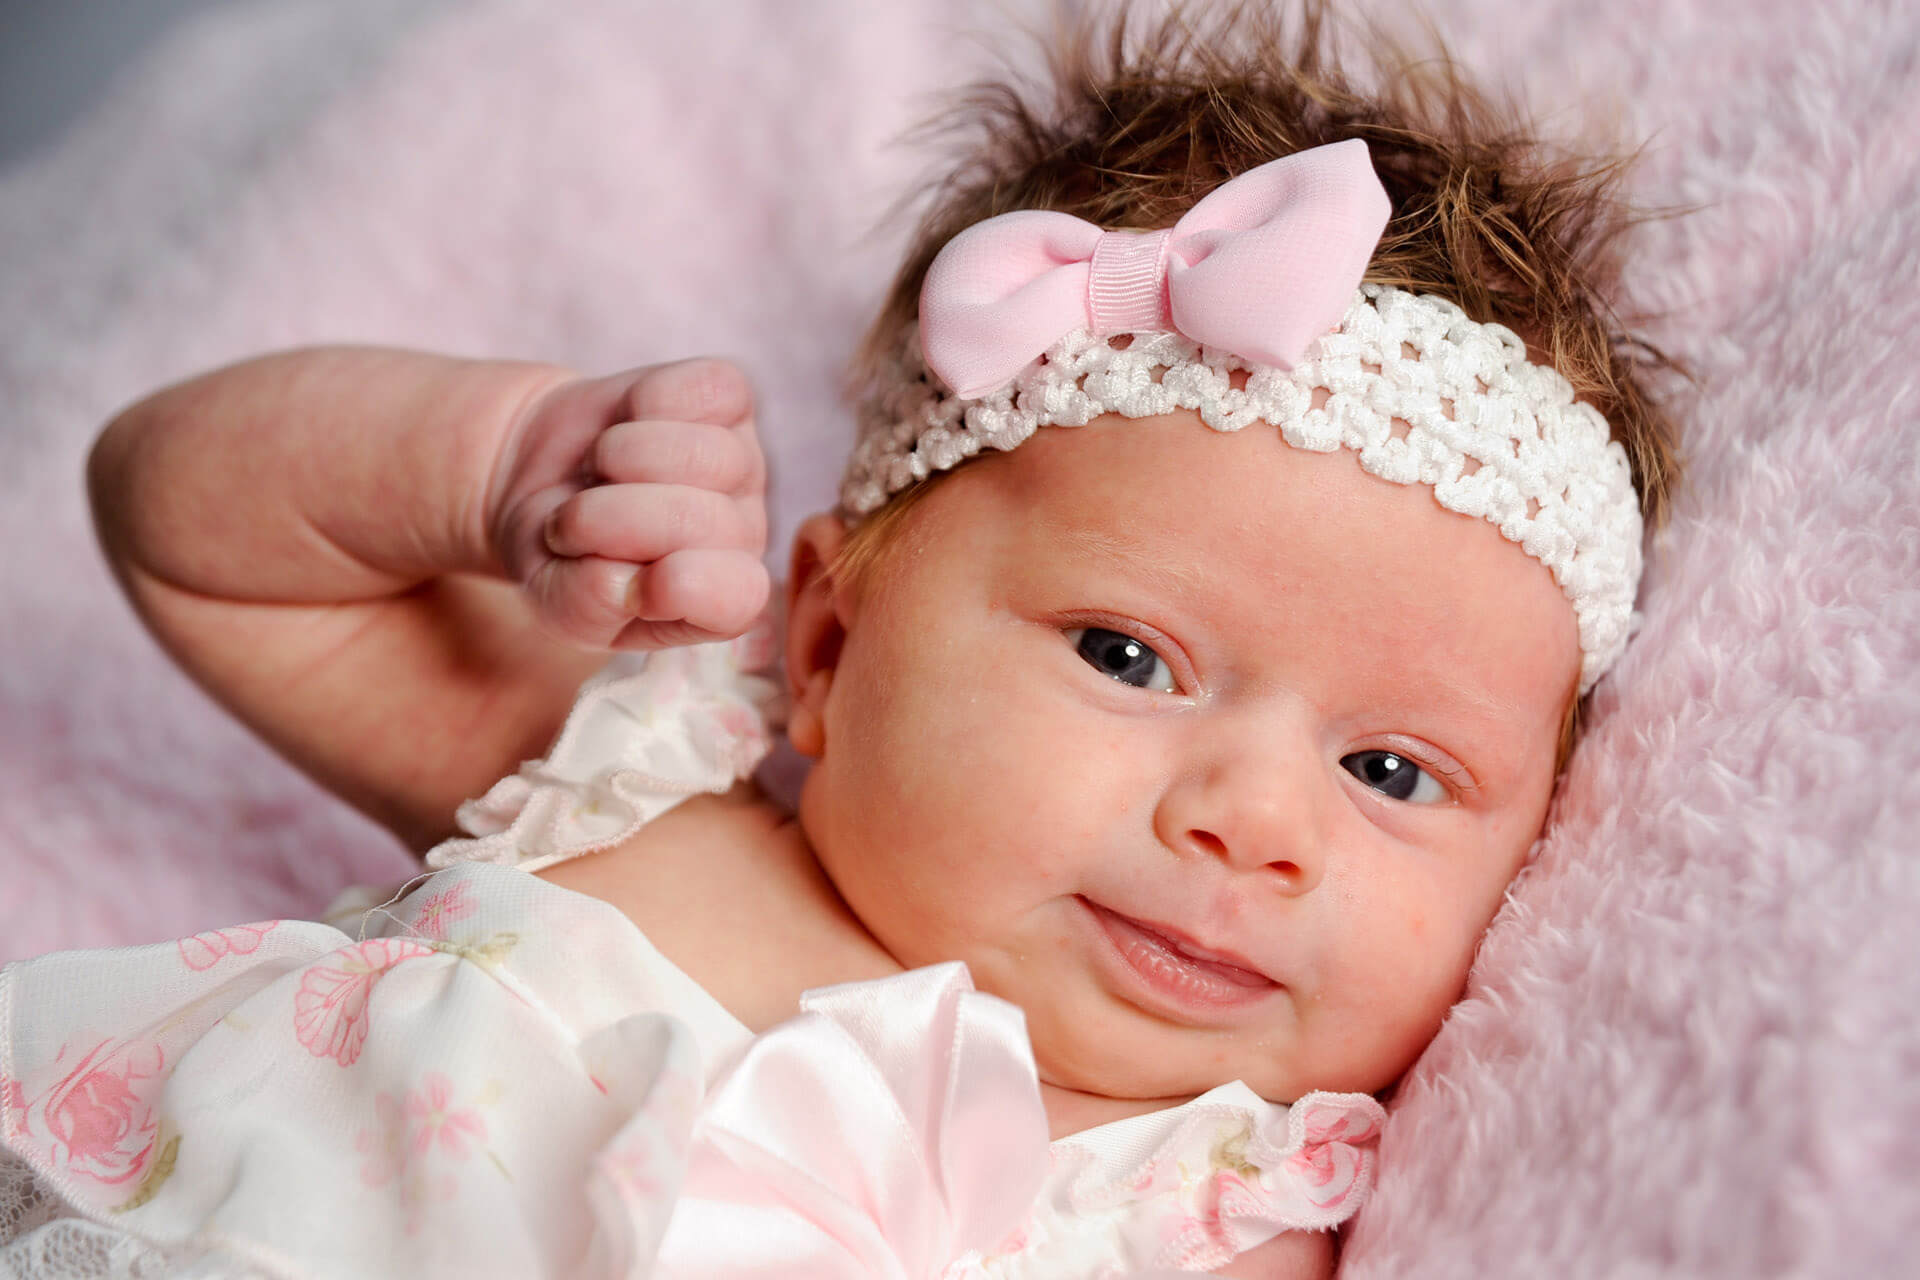 Best Detroit infant photographer takes personality filled newborn lifestyle photos in metro Detroit, Michigan.